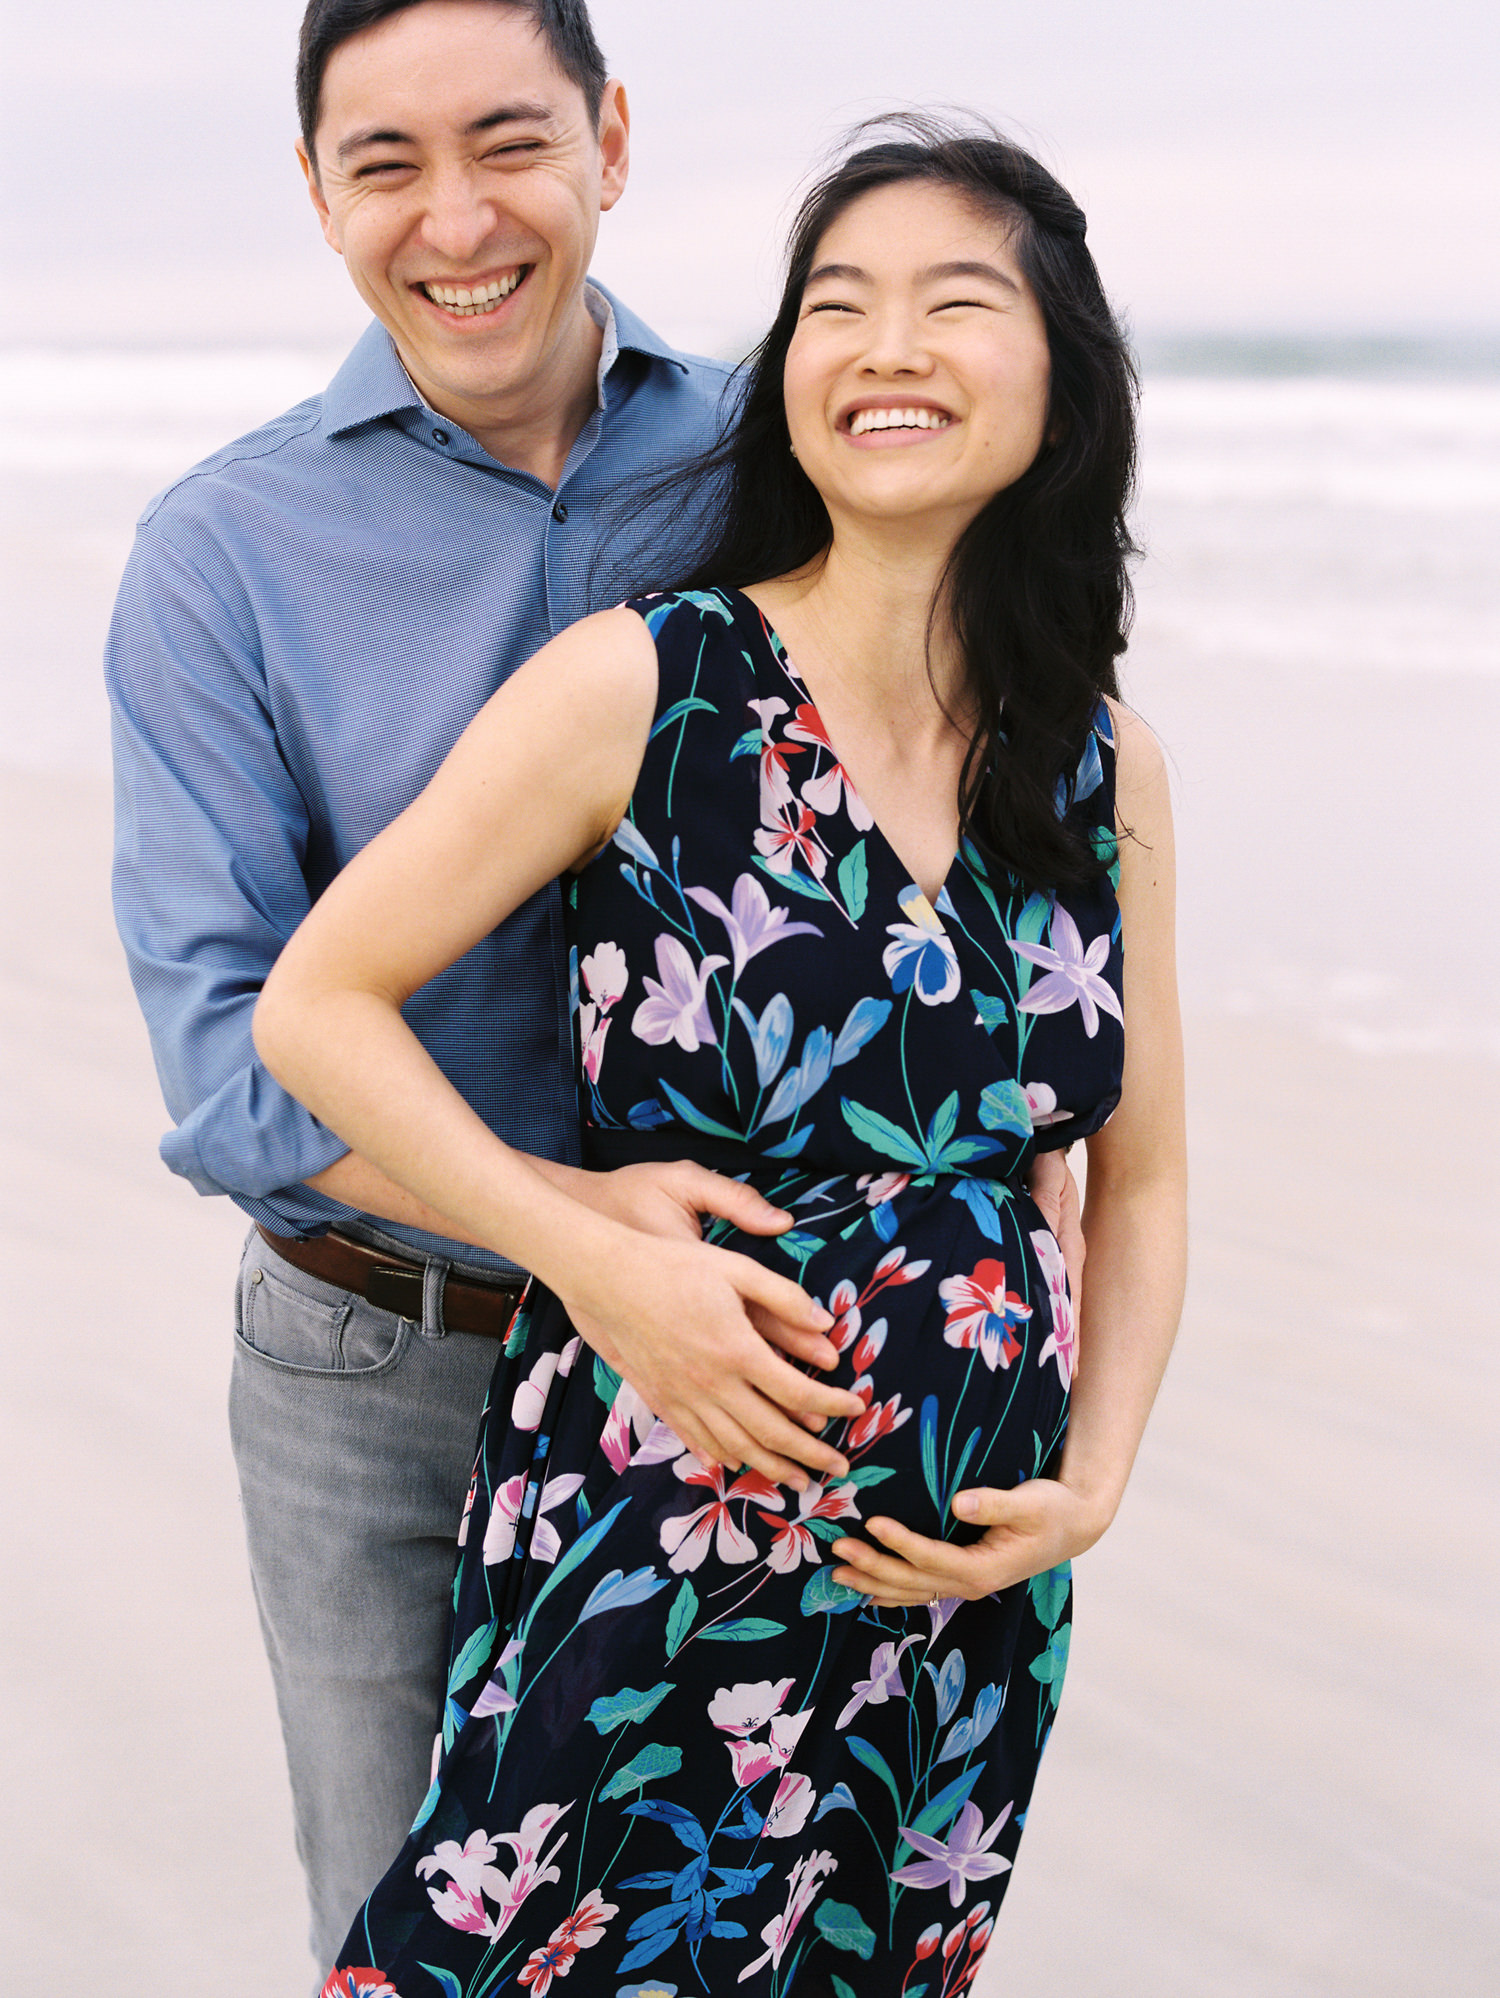 man in blue shirt standing behind pregnant wife in a blue floral dress putting their hands on her pregnant belly